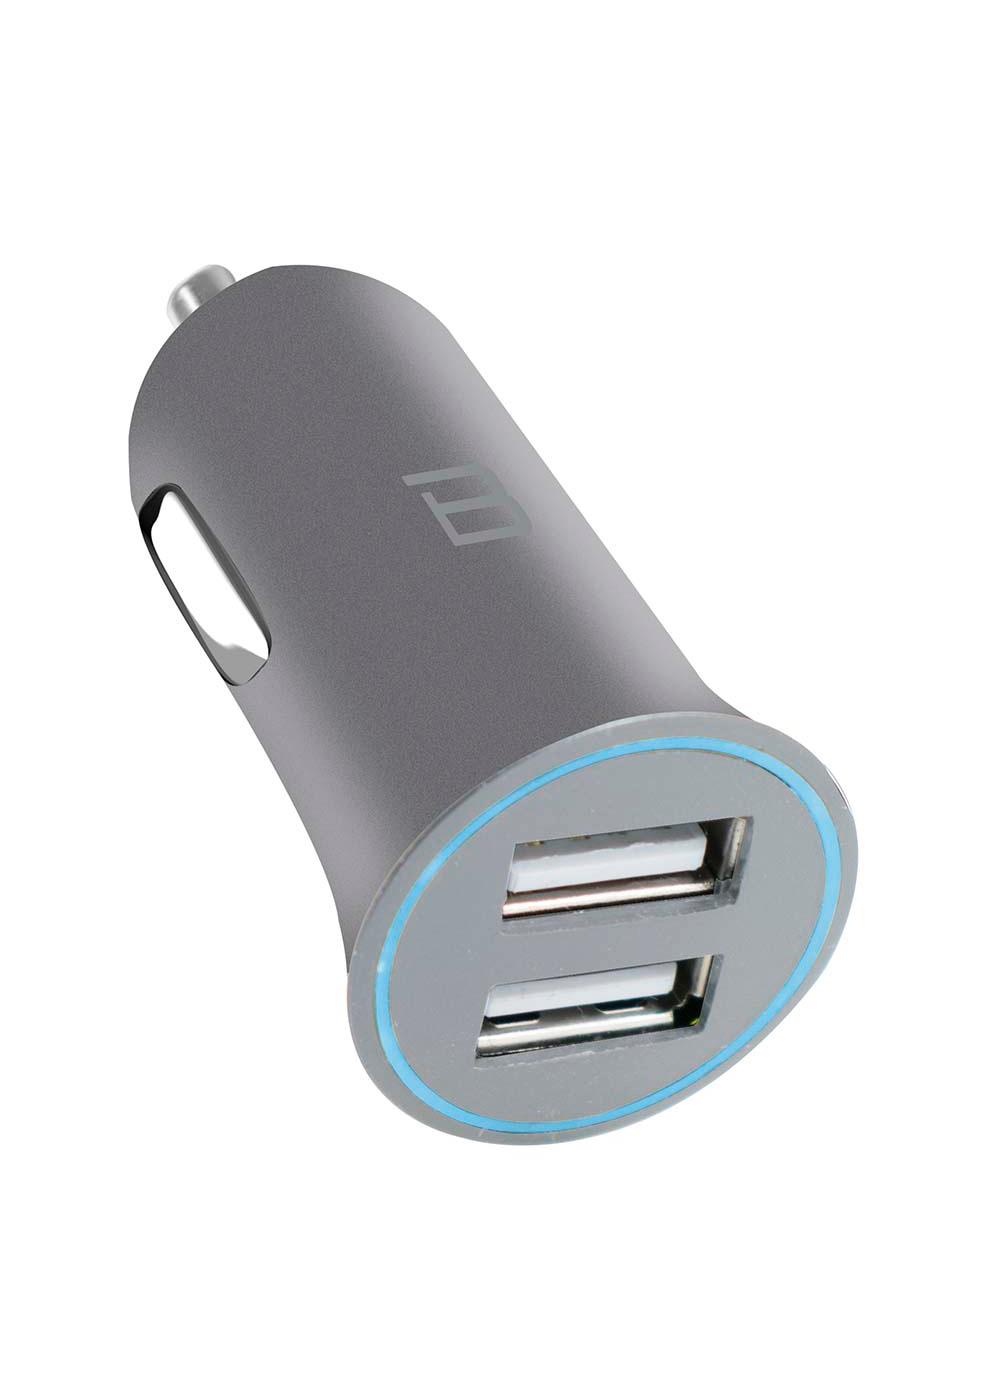 Bytech Dual-Port USB Car Charger - Silver; image 2 of 2